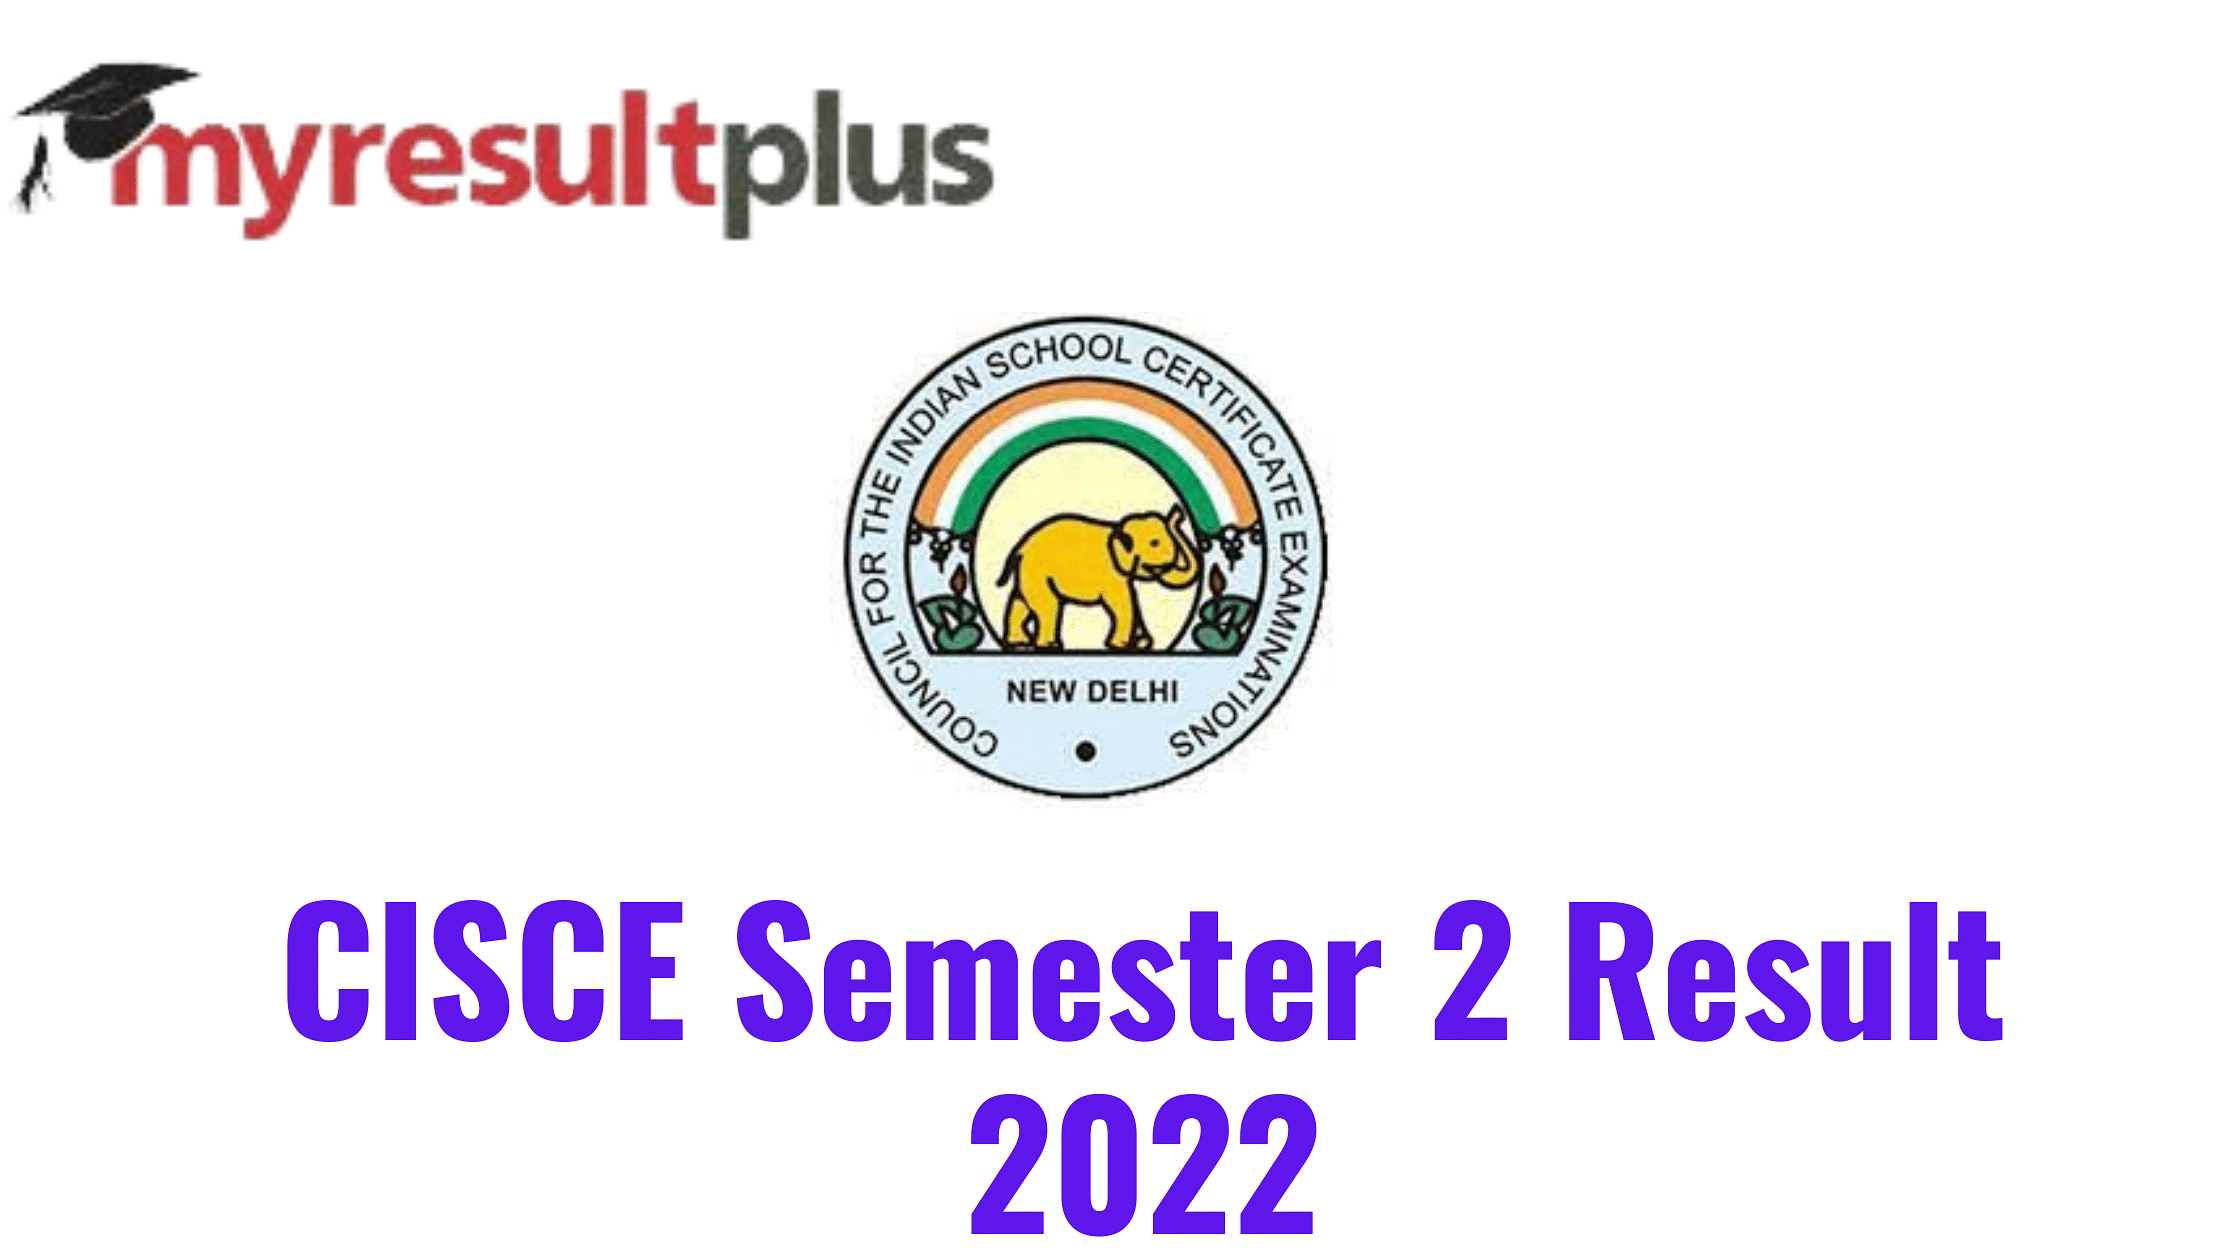 ISC Result 2022 Likely To Be Declared Tomorrow, Detailed Guide to Check Scores Here